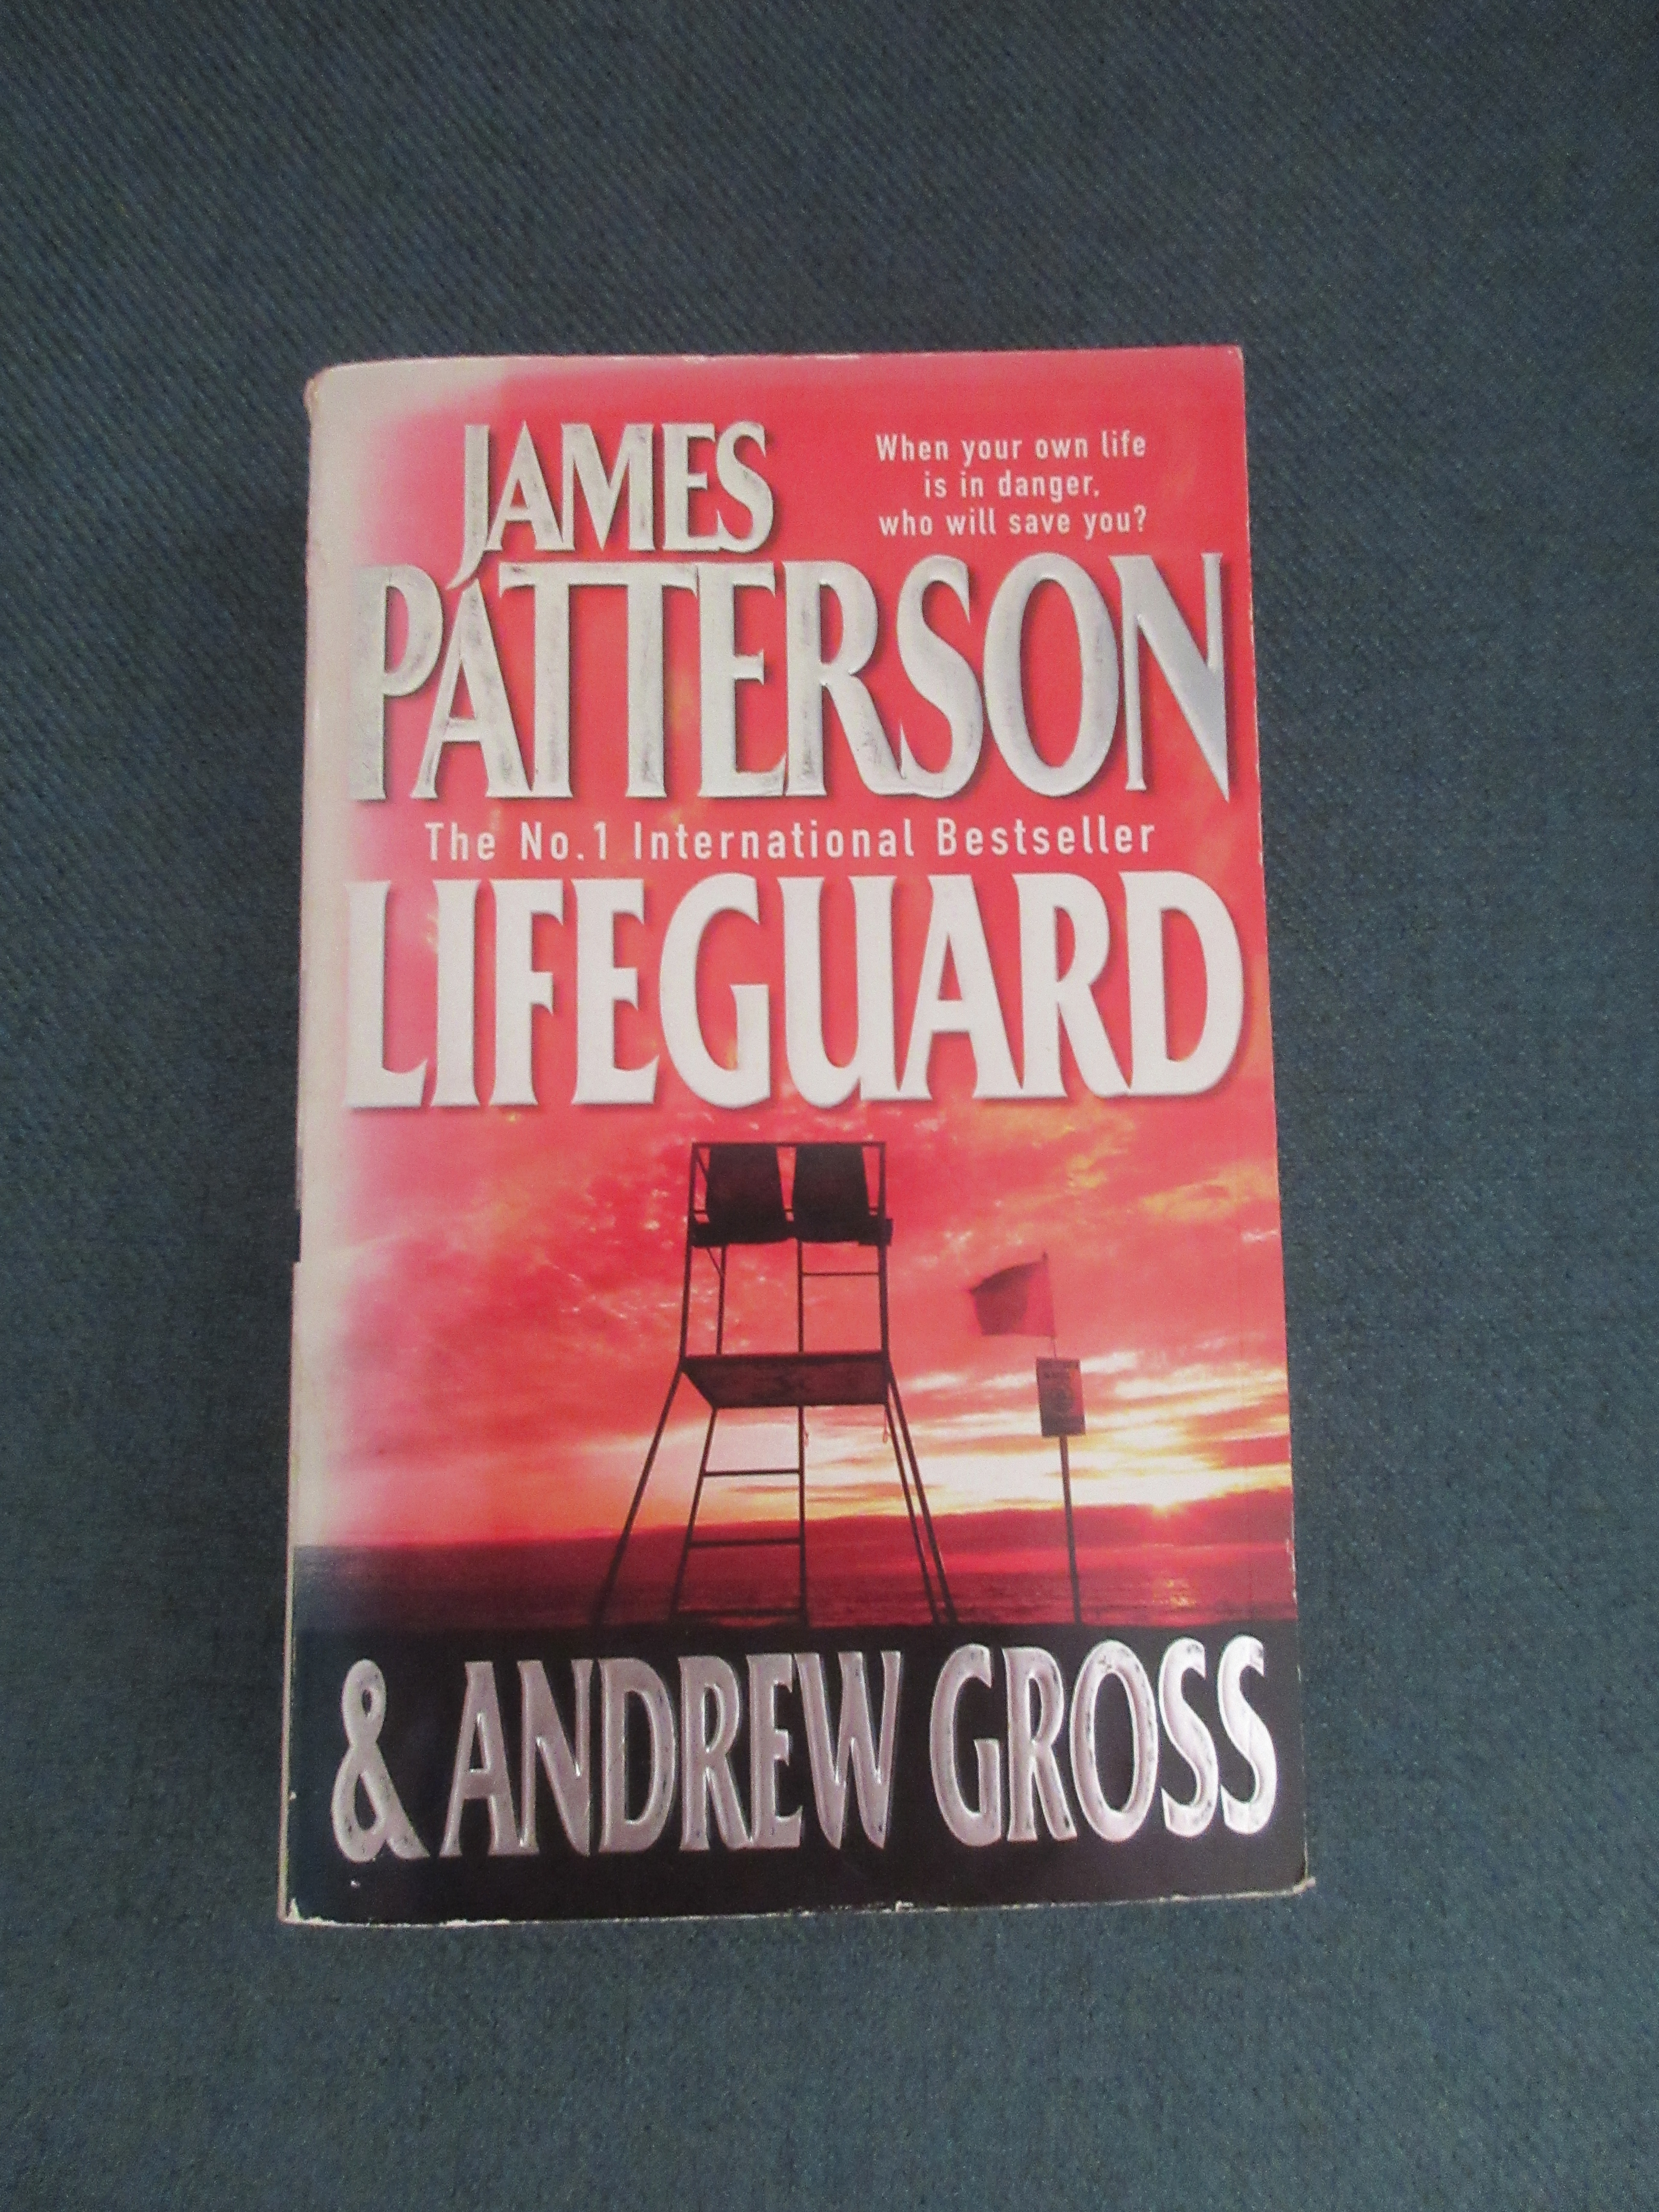 Lifeguard by James Patterson and Andrew Gross - photo by Juliamaud